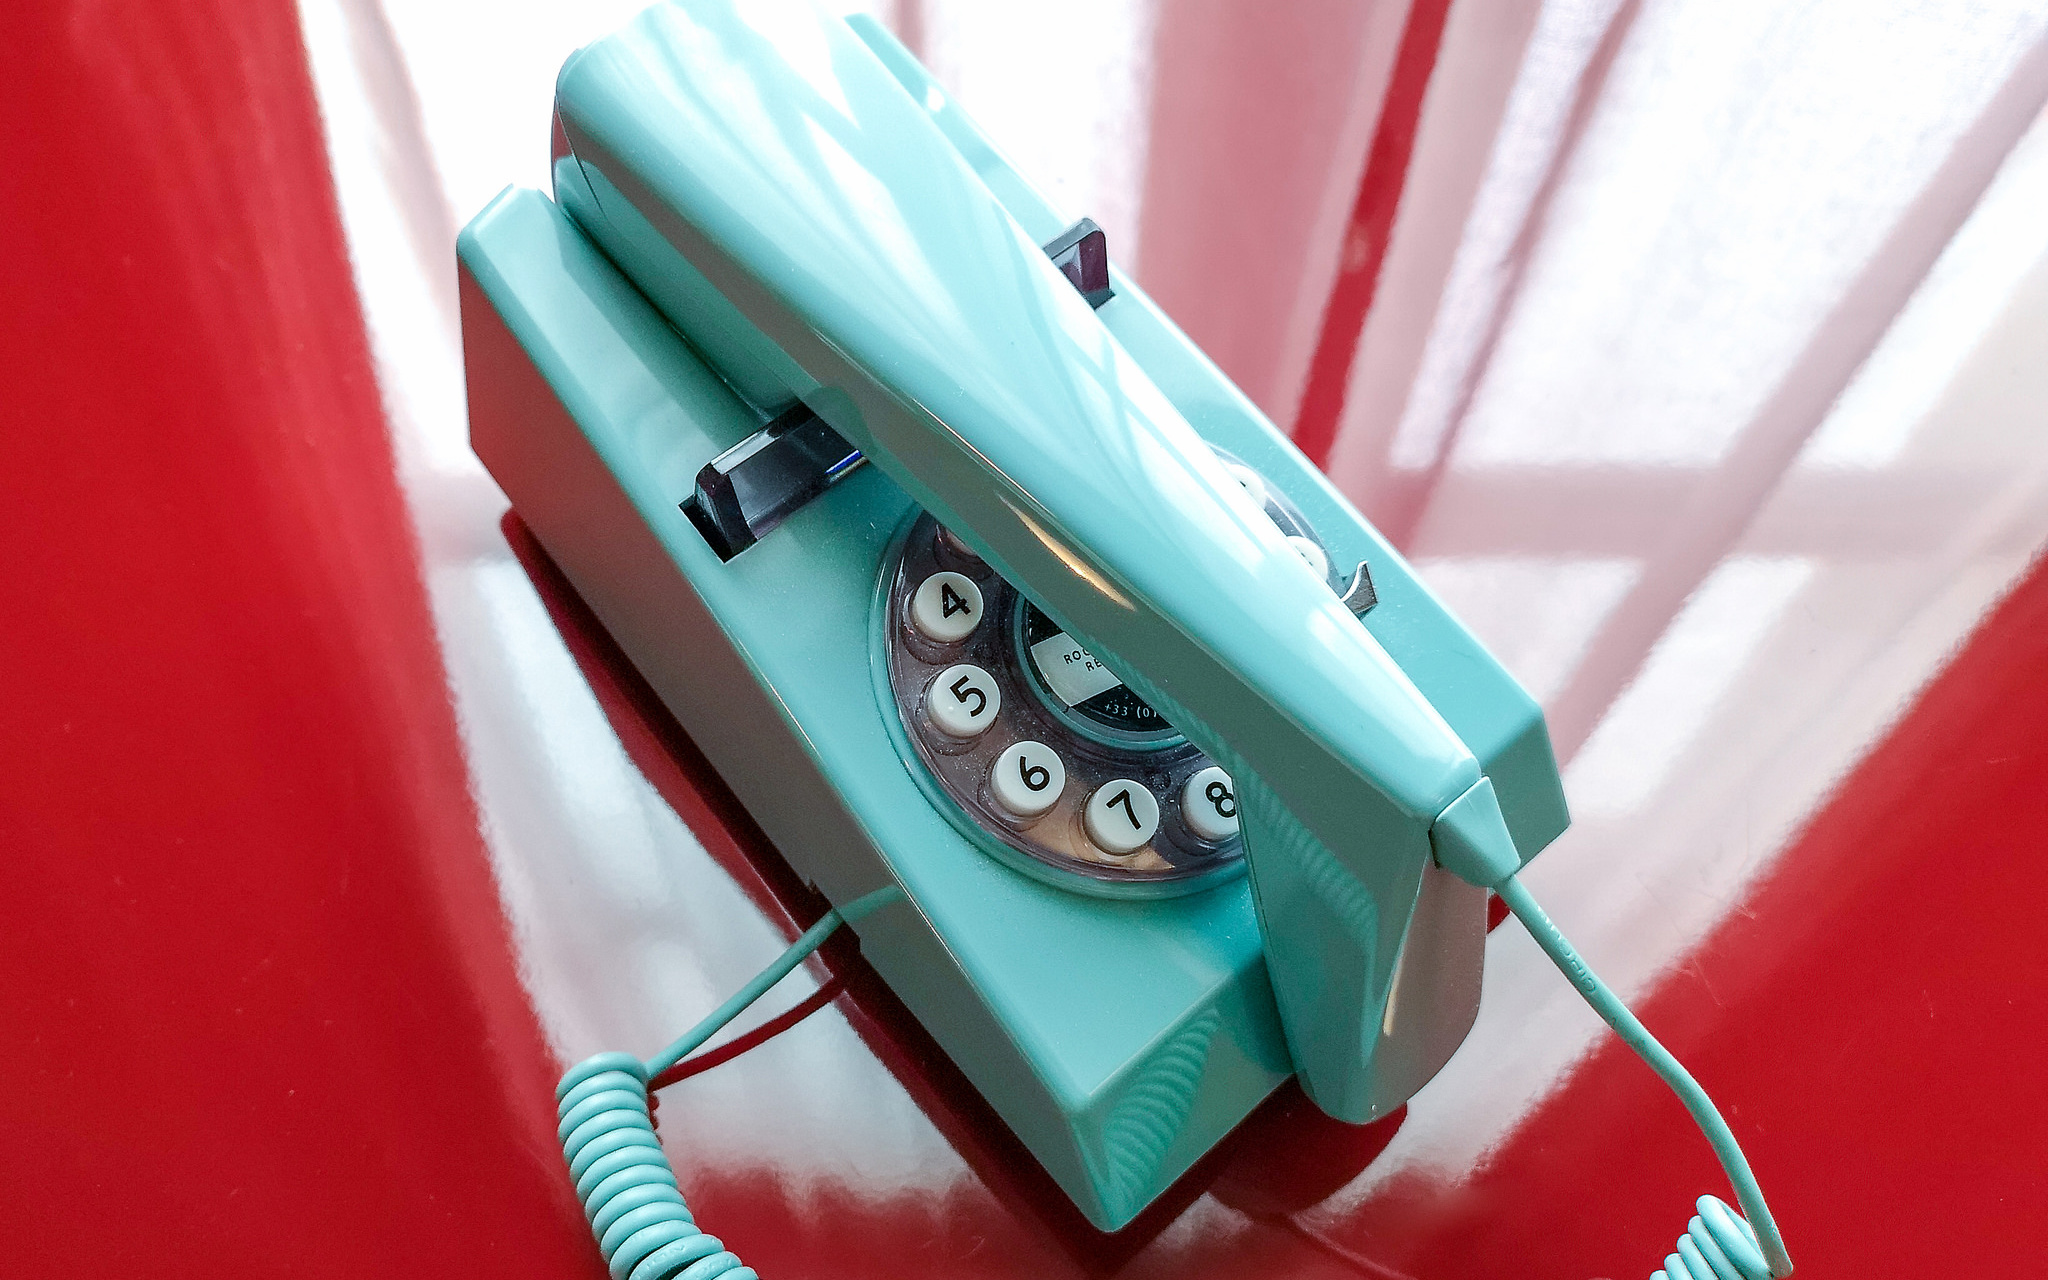 Image: A blue telephone upon a red table. "Telephone" by GillyBerlin is licensed under CC BY 2.0